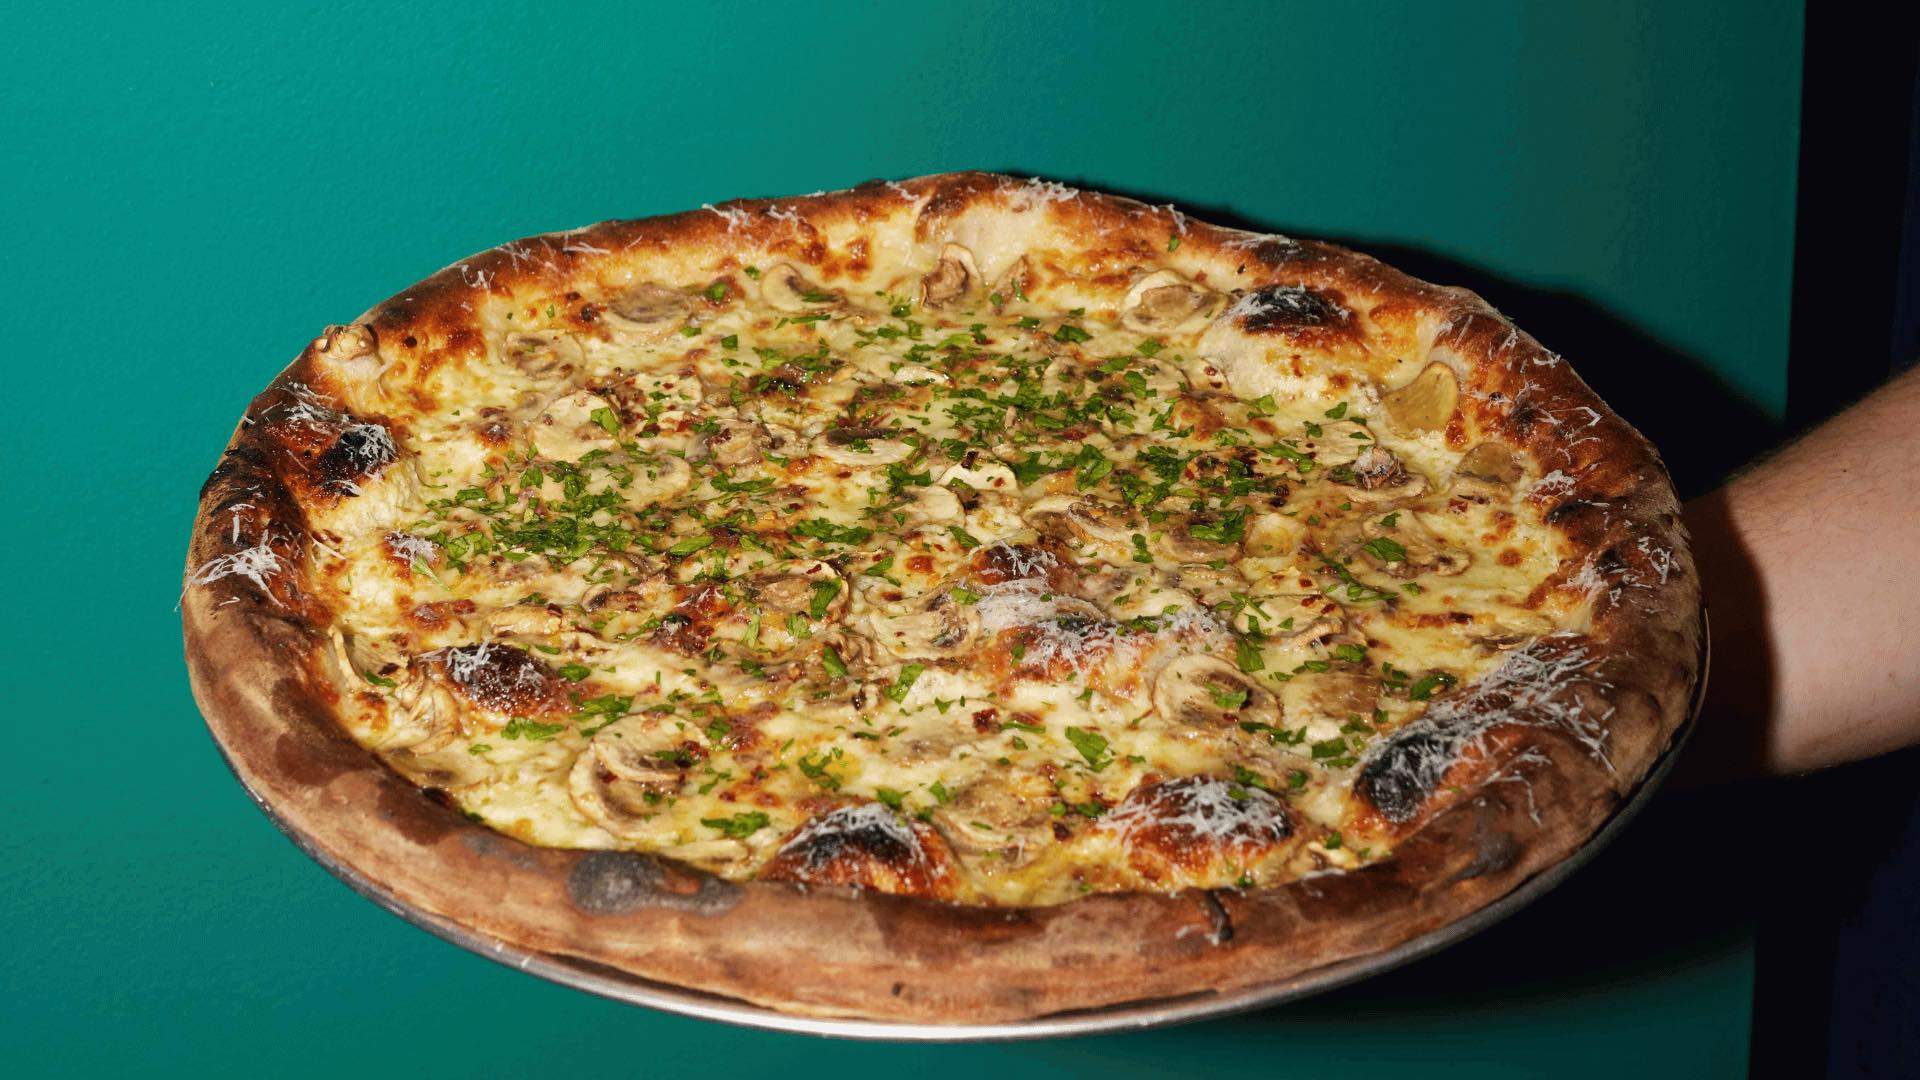 A large pizza with mushrooms from City Oltra.